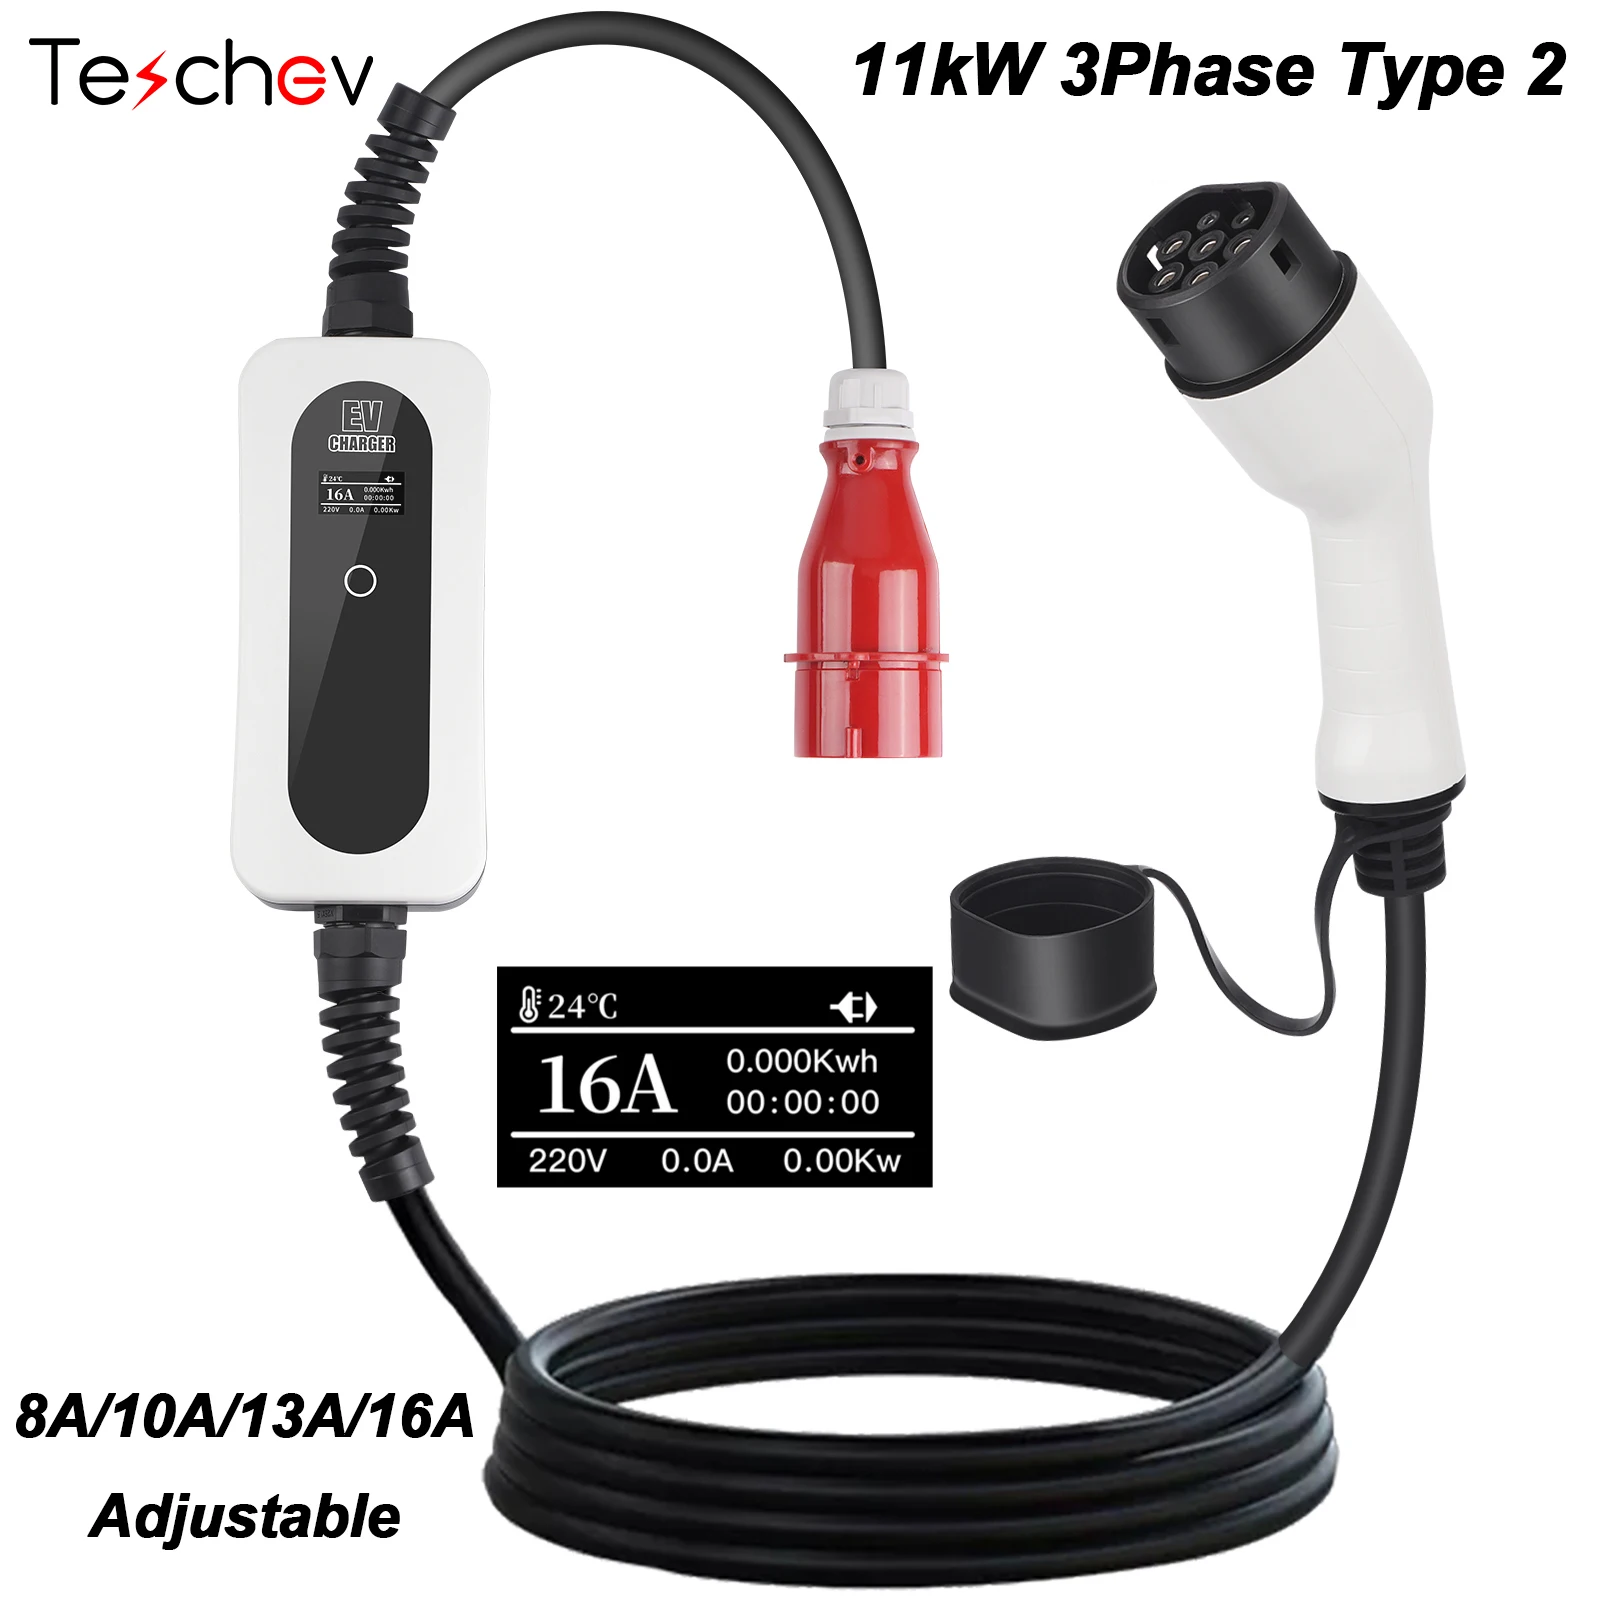 Teschev Wallbox 11kw ev charger type 2 3 phase 8A/10A/13A/16A Adjustable IP65Electric Vehicle Charger IEC62196-2 5M